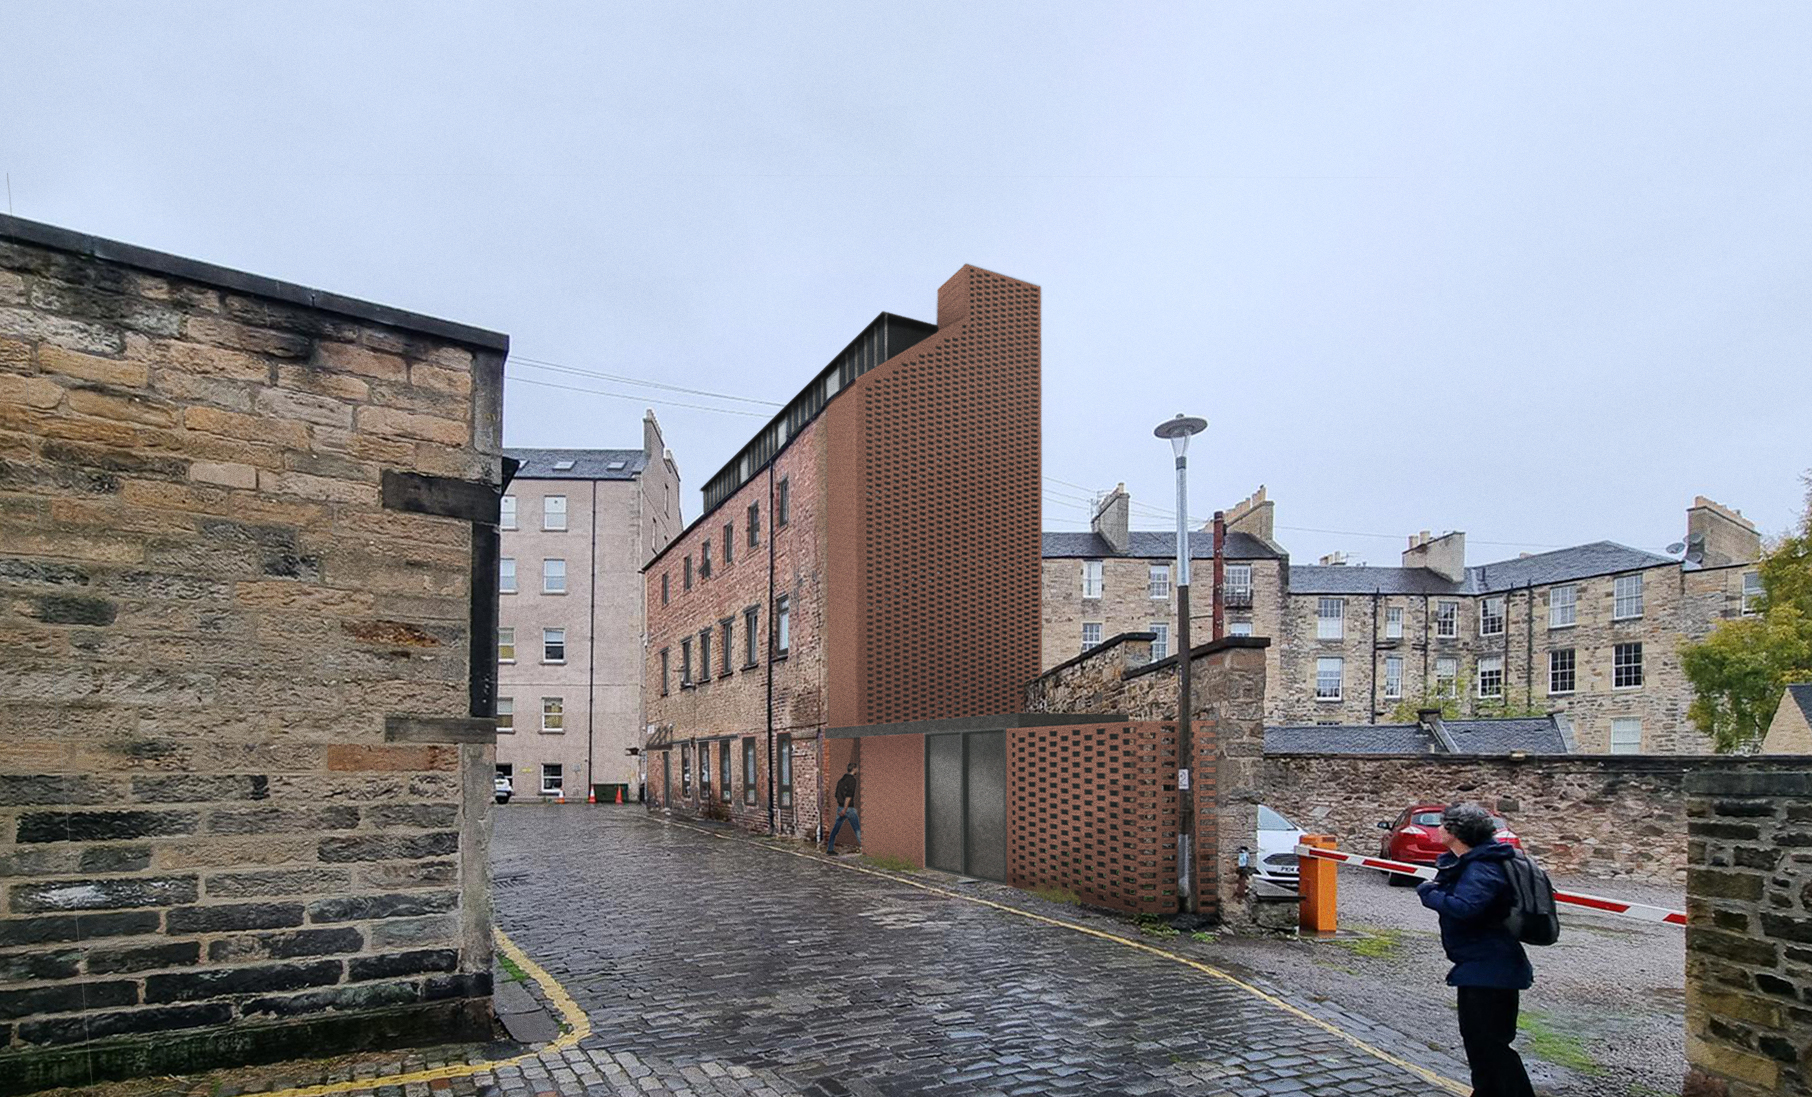 Plans submitted for short term let apartments in Edinburgh’s Broughton Market